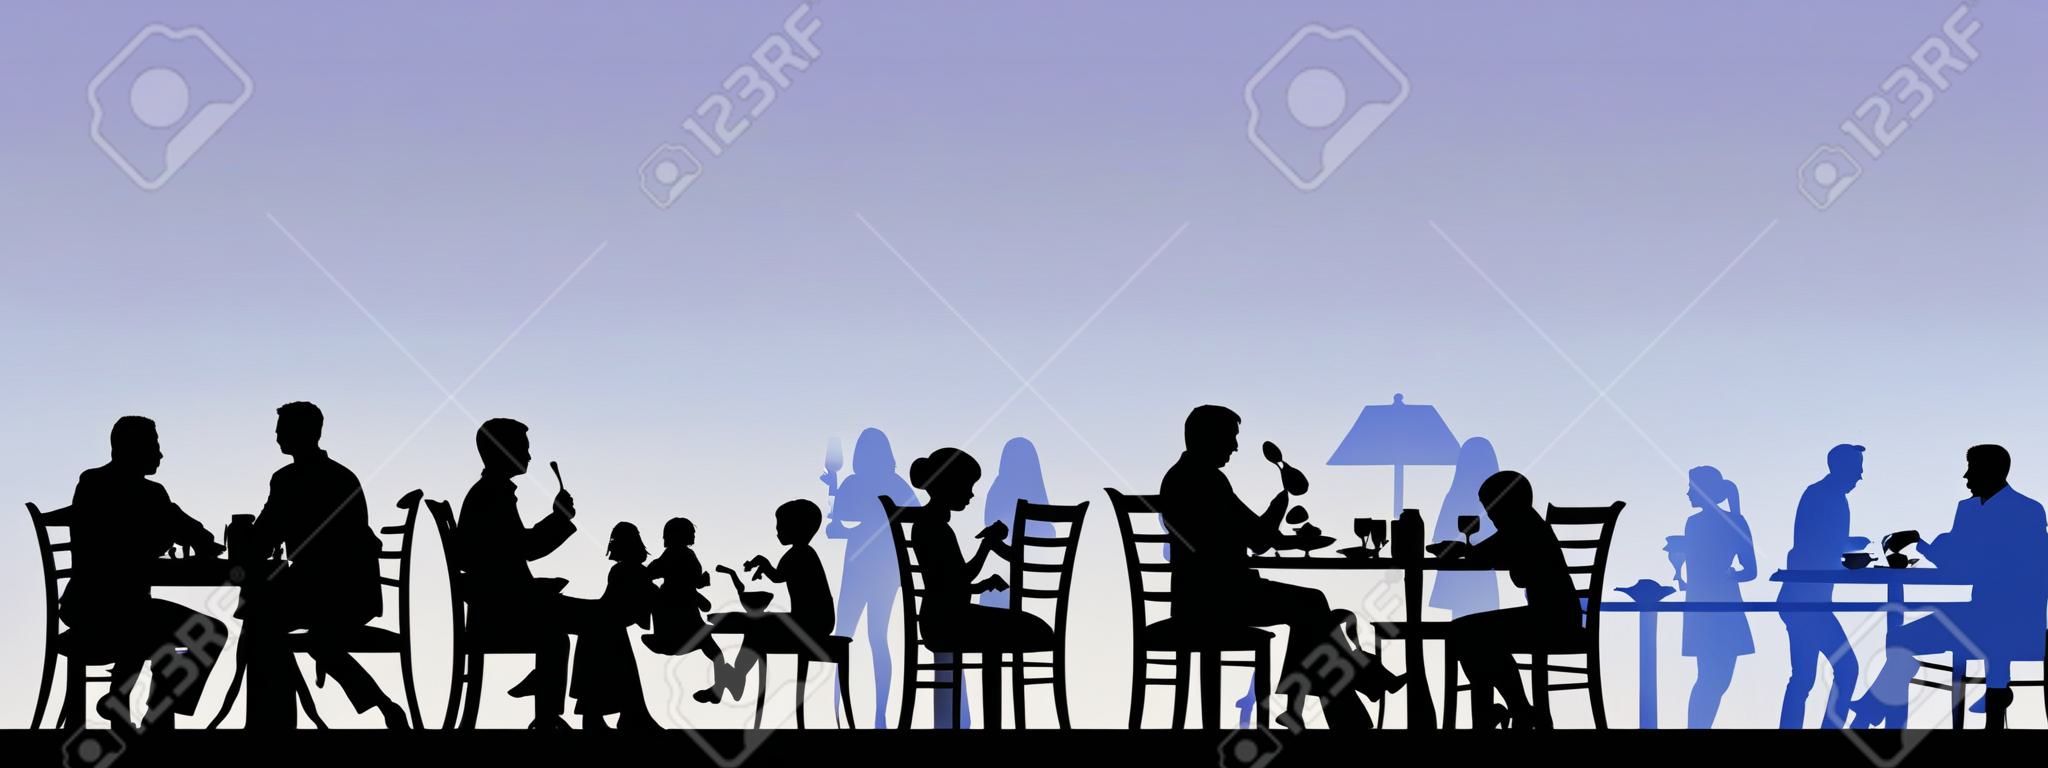 Silhouette of people eating in a restaurant with all figures as separate objects layered